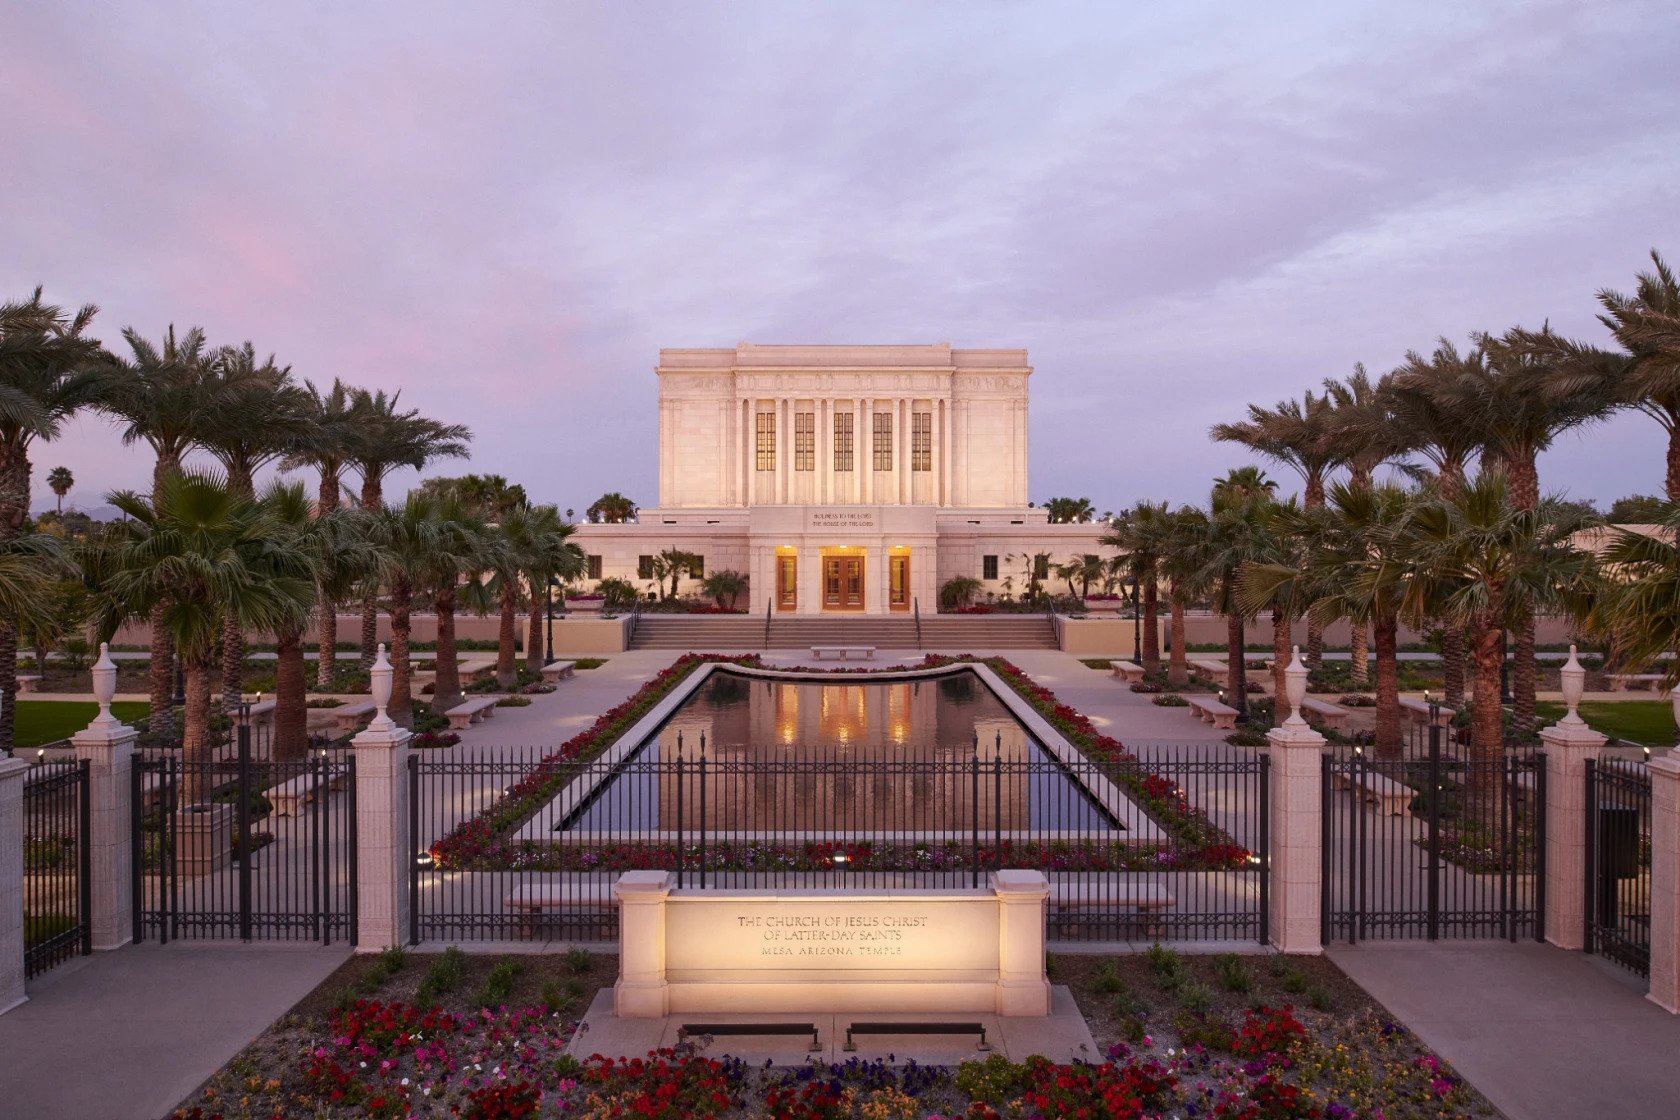 The Mesa temple, a rectangular building with a large reflecting pool in front of it and a stone sign that says "Mesa Arizona Temple."